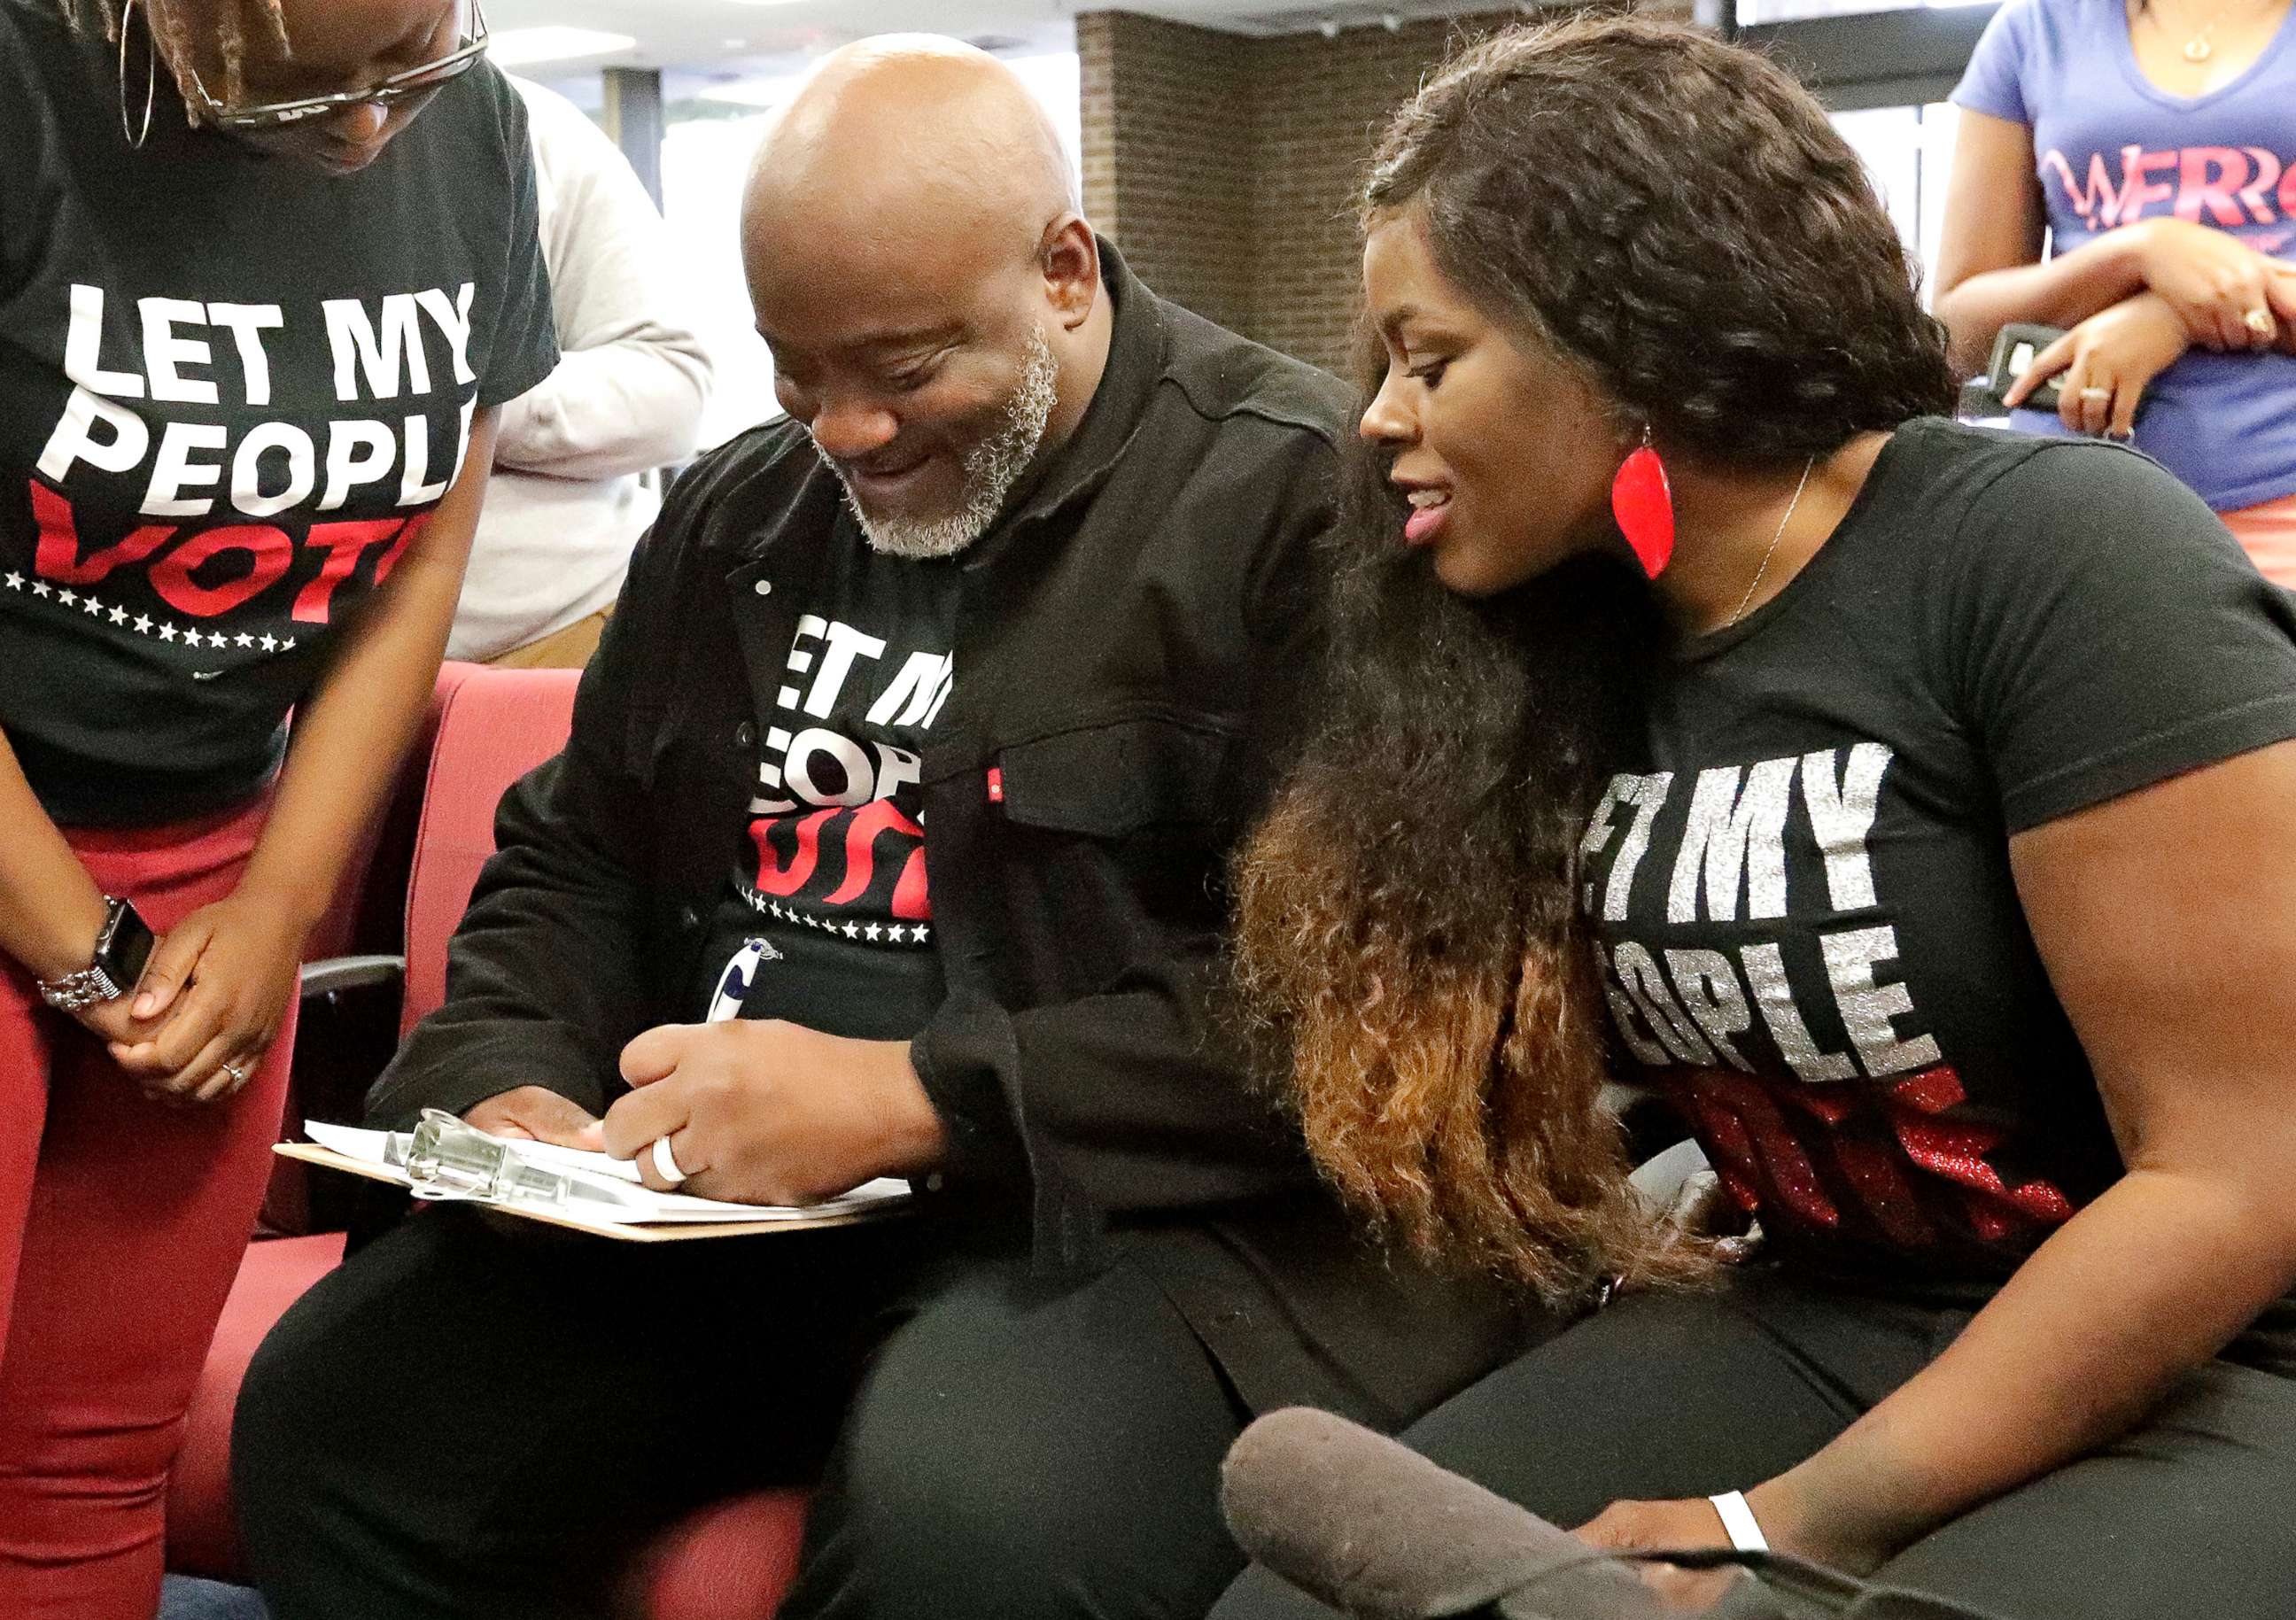 PHOTO: In this Jan. 8, 2019, file photo, former felon Desmond Meade and president of the Florida Rights Restoration Coalition, left, fills out a voter registration form as his wife Sheena looks on at the Supervisor of Elections office in Orlando, Fla.